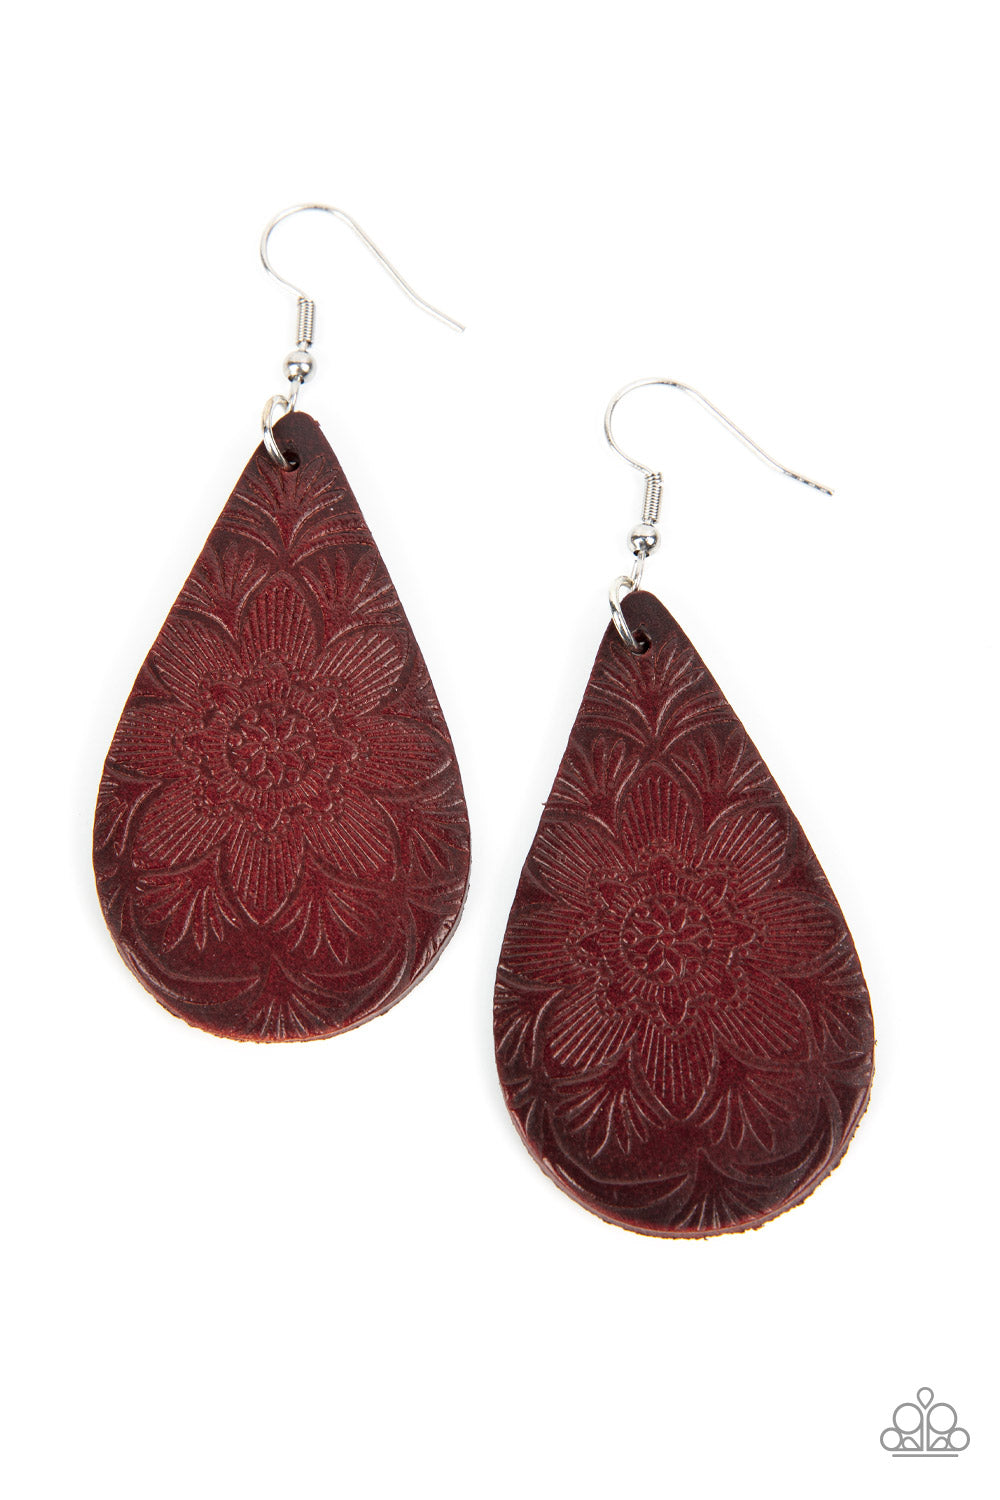 Subtropical Seasons Brown Earring - Paparazzi Accessories  Embossed in a tropical floral pattern, a distressed brown leather teardrop swings from the ear for a whimsically rustic flair. Earring attaches to a standard fishhook fitting.  Sold as one pair of earrings.